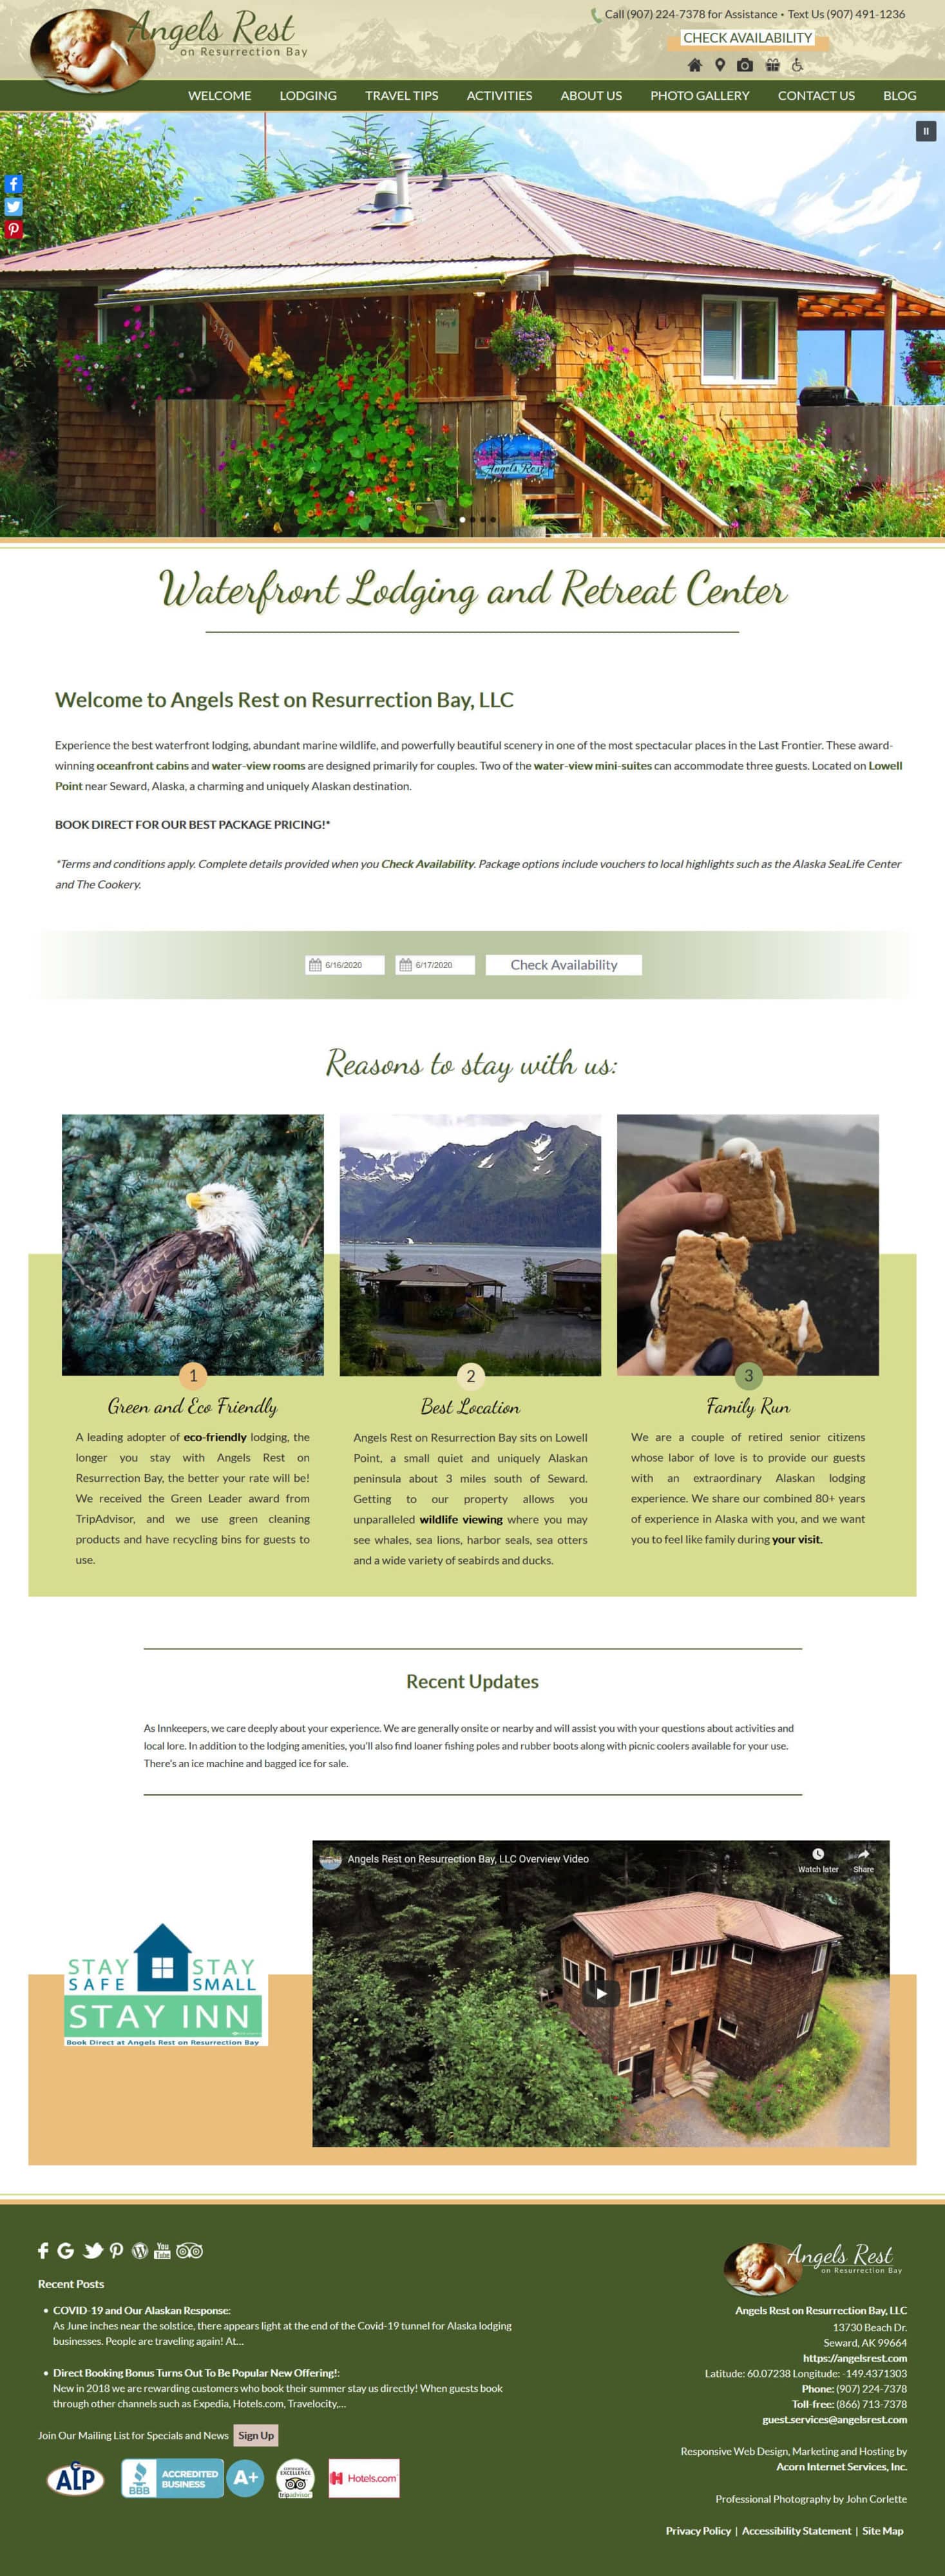 Screenshot of the home page of Angels Rest on Resurrection Bay Waterfront Lodging